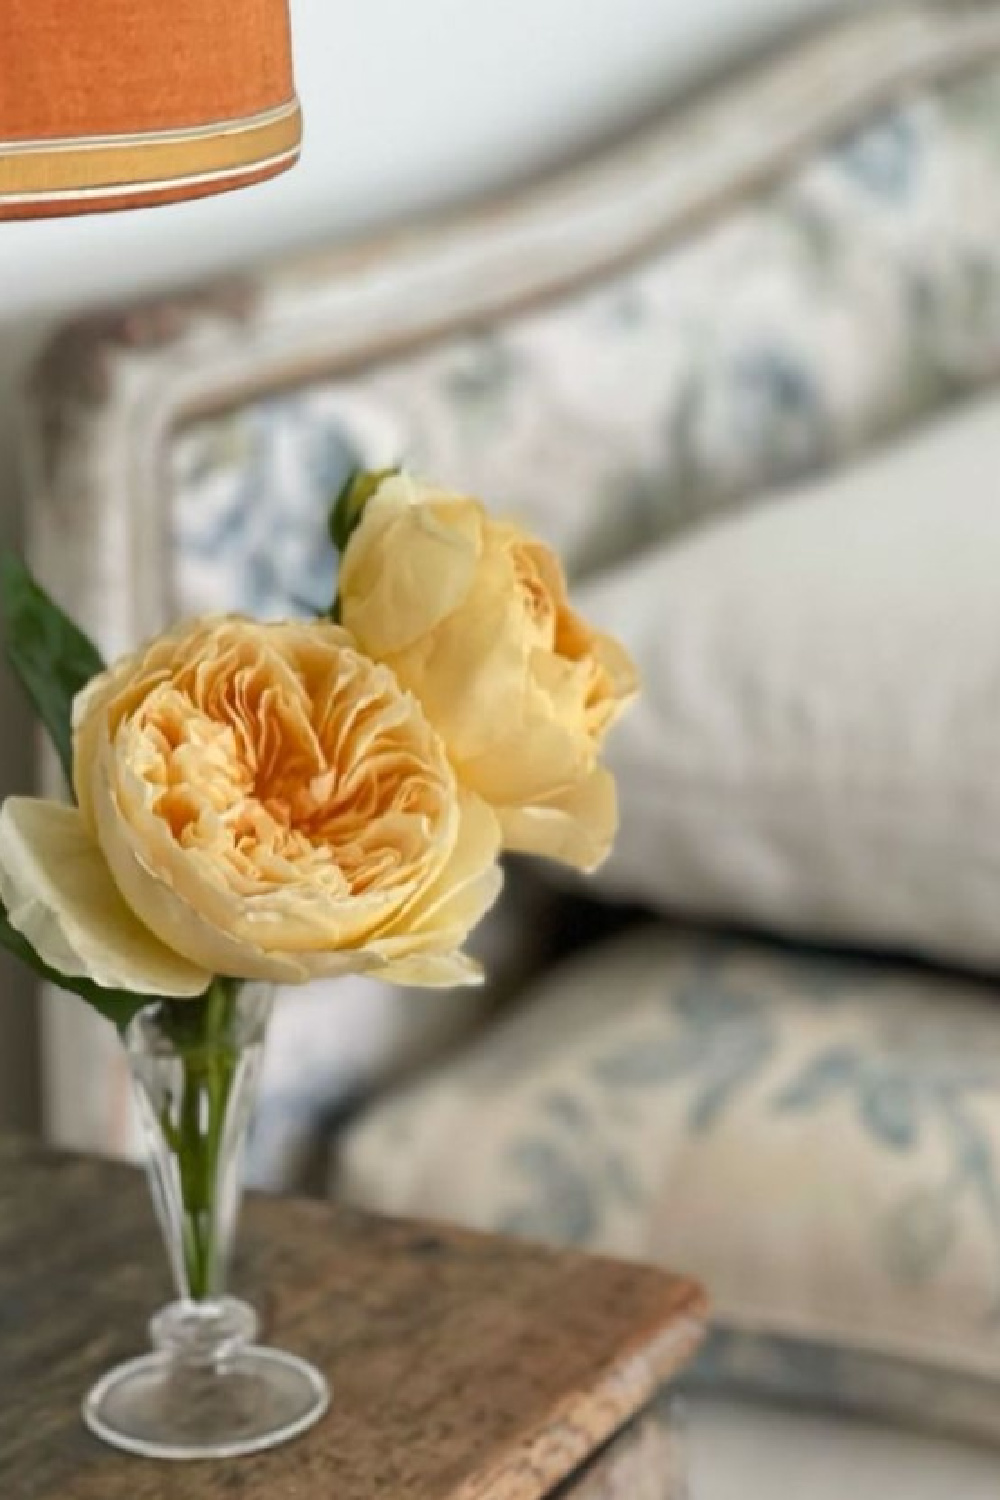 Roses on a bedside table. Timeless interior design by Shannon Bowers with nods to European antiques, patina, understated elegance, and sophisticated simplicity. #shannonbowers #timelessinteriors